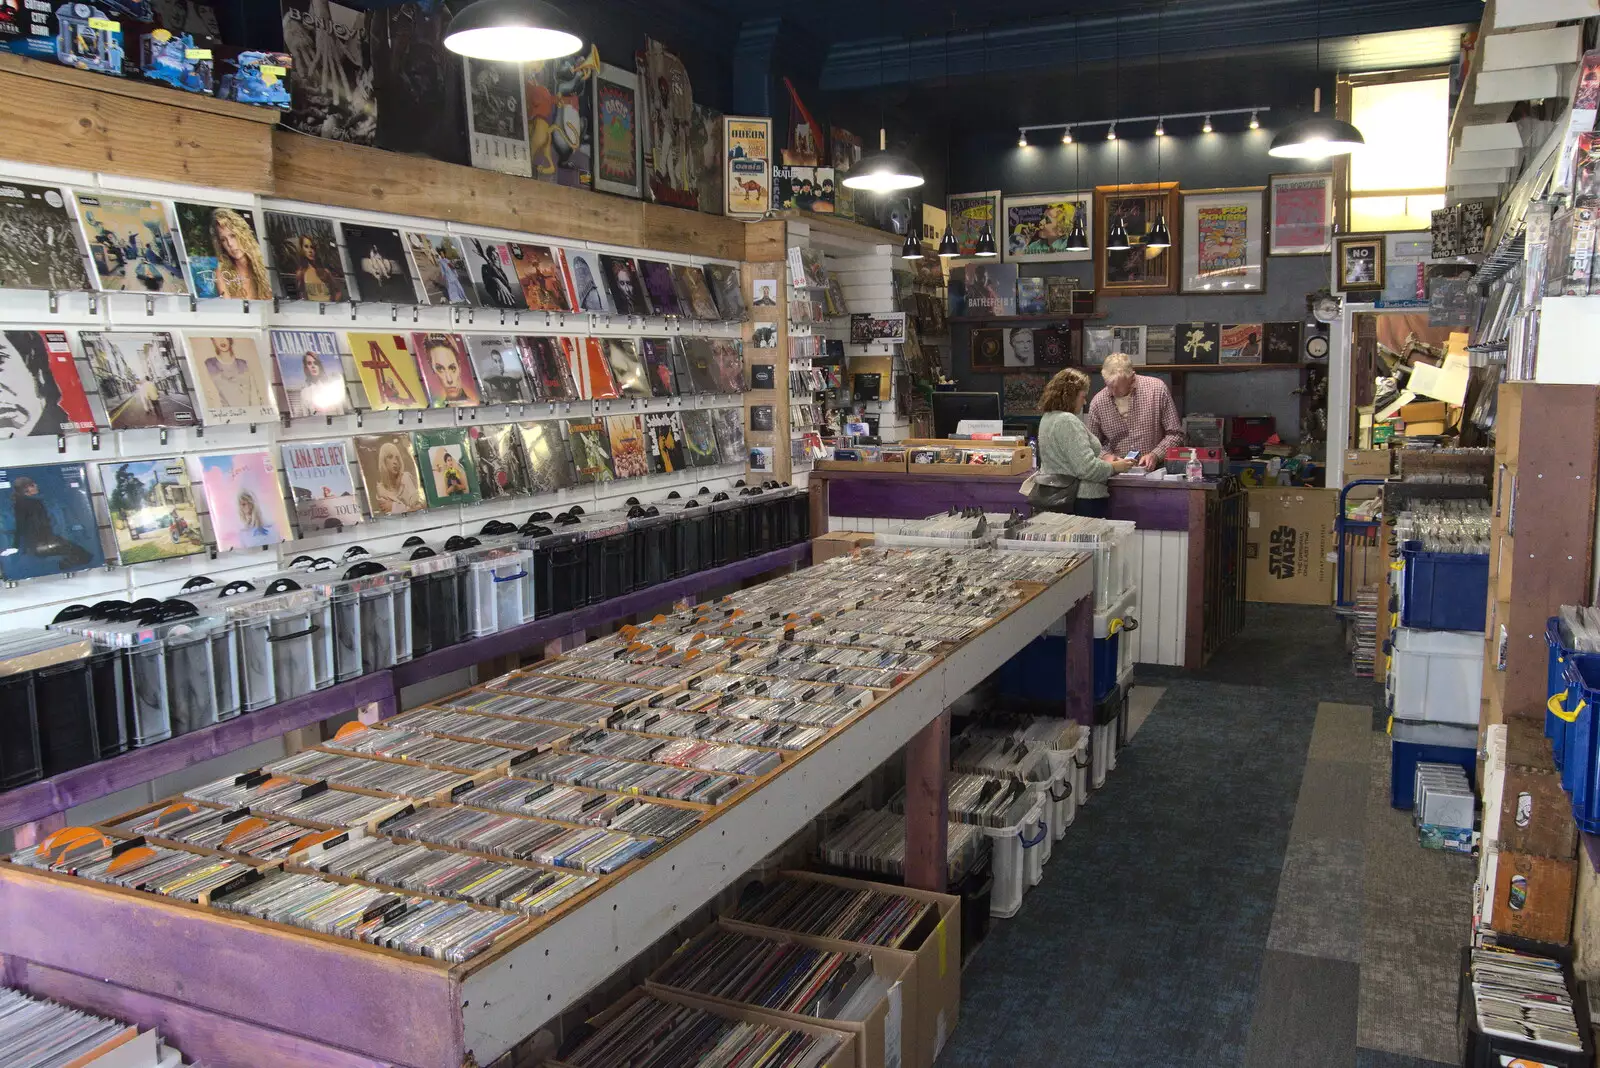 Onion Records: a cool vinyl and CD shop, from A Postcard from Felixstowe, Suffolk - 5th October 2022